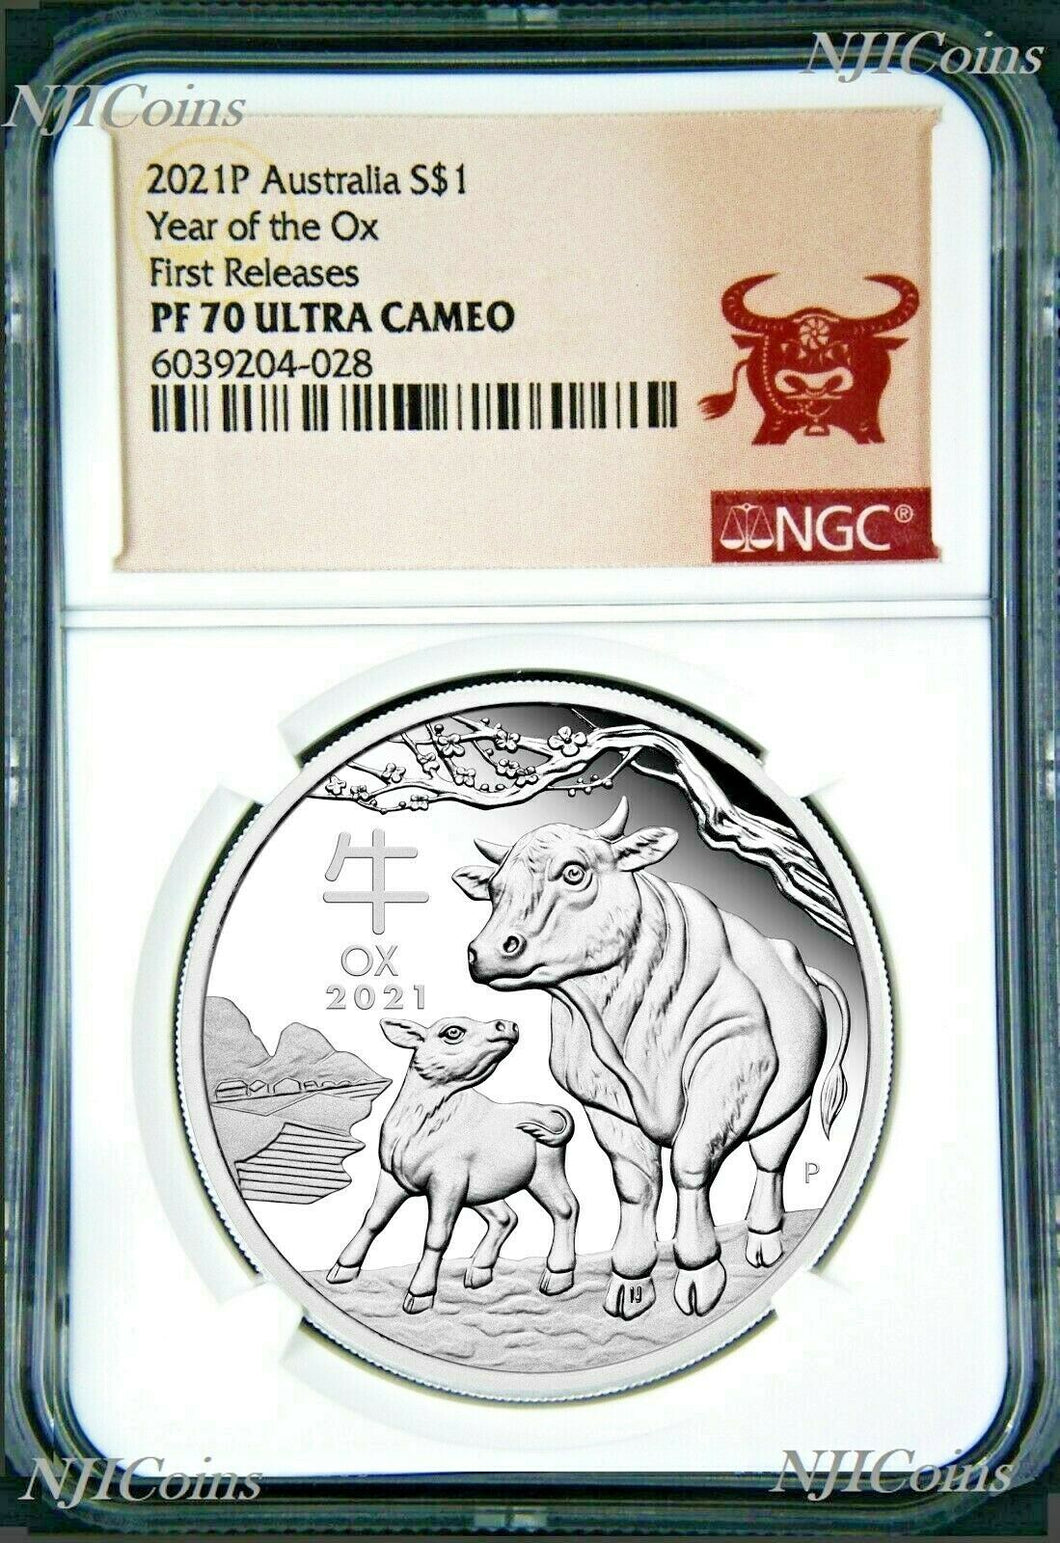 2021 Australia PROOF Silver Lunar Year of the OX NGC PF70 1oz $1 Coin w/OGP